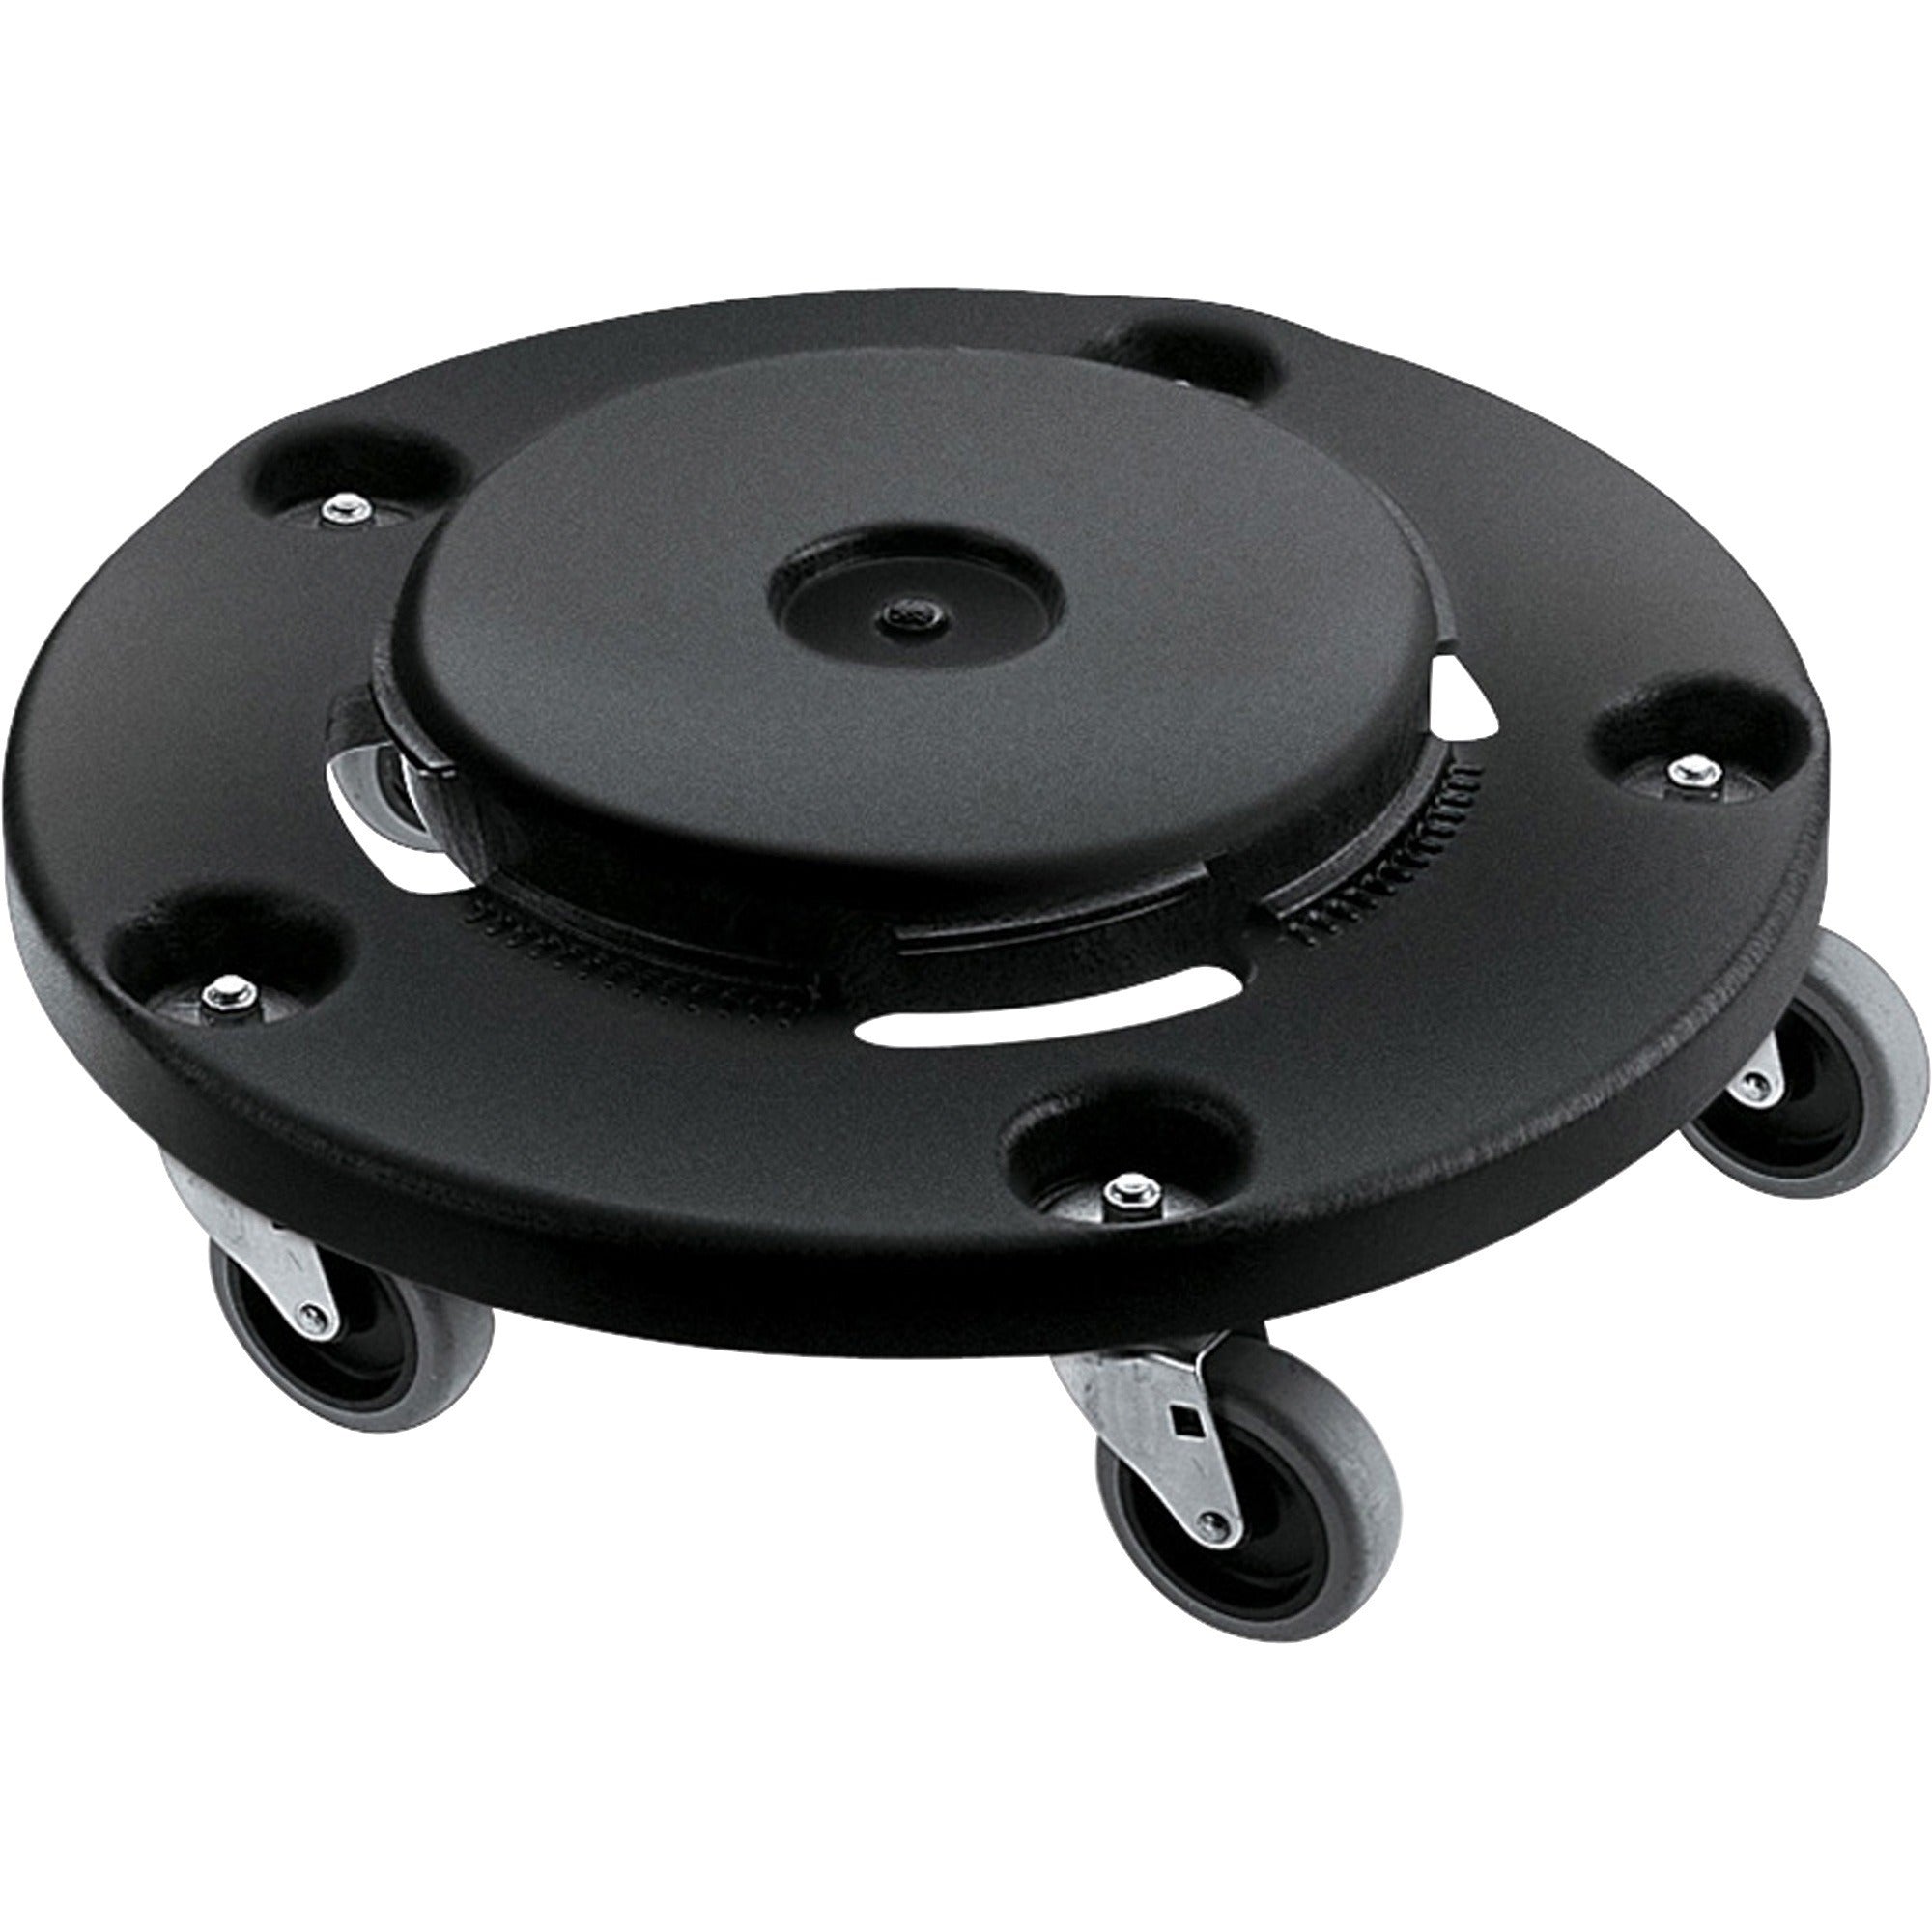 rubbermaid-commercial-brute-easy-twist-round-dollies-350-lb-capacity-5-casters-structural-foam-x-183-width-x-66-height-black-2-carton_rcp264000bkct - 1